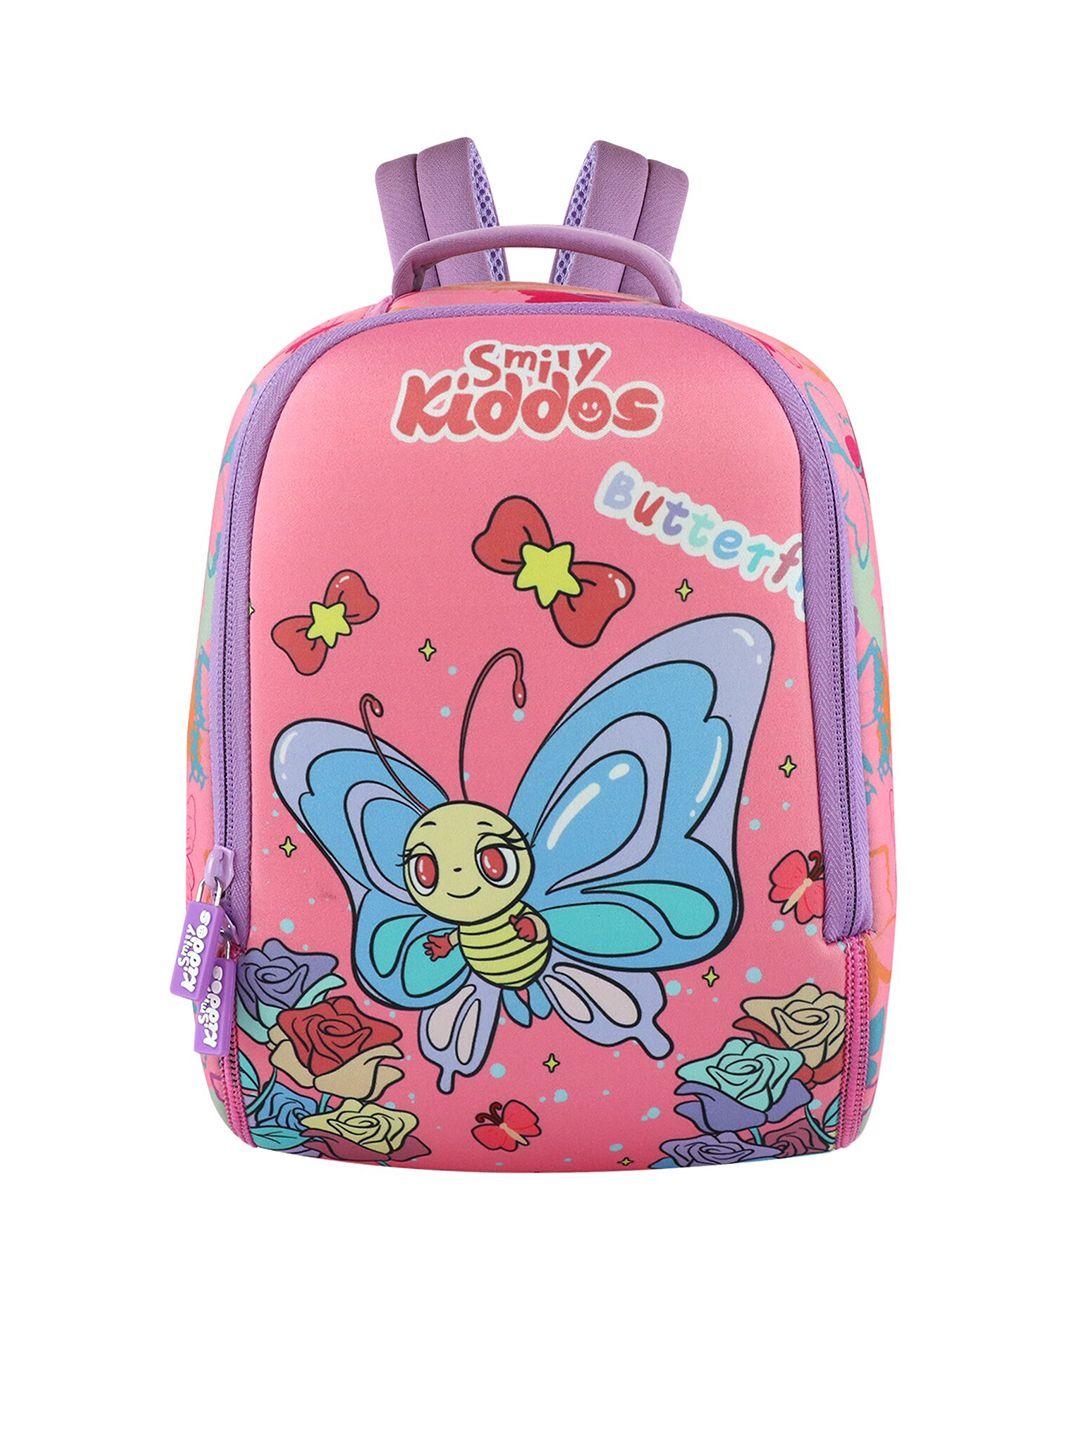 smily kiddos kids butterfly theme graphic backpack